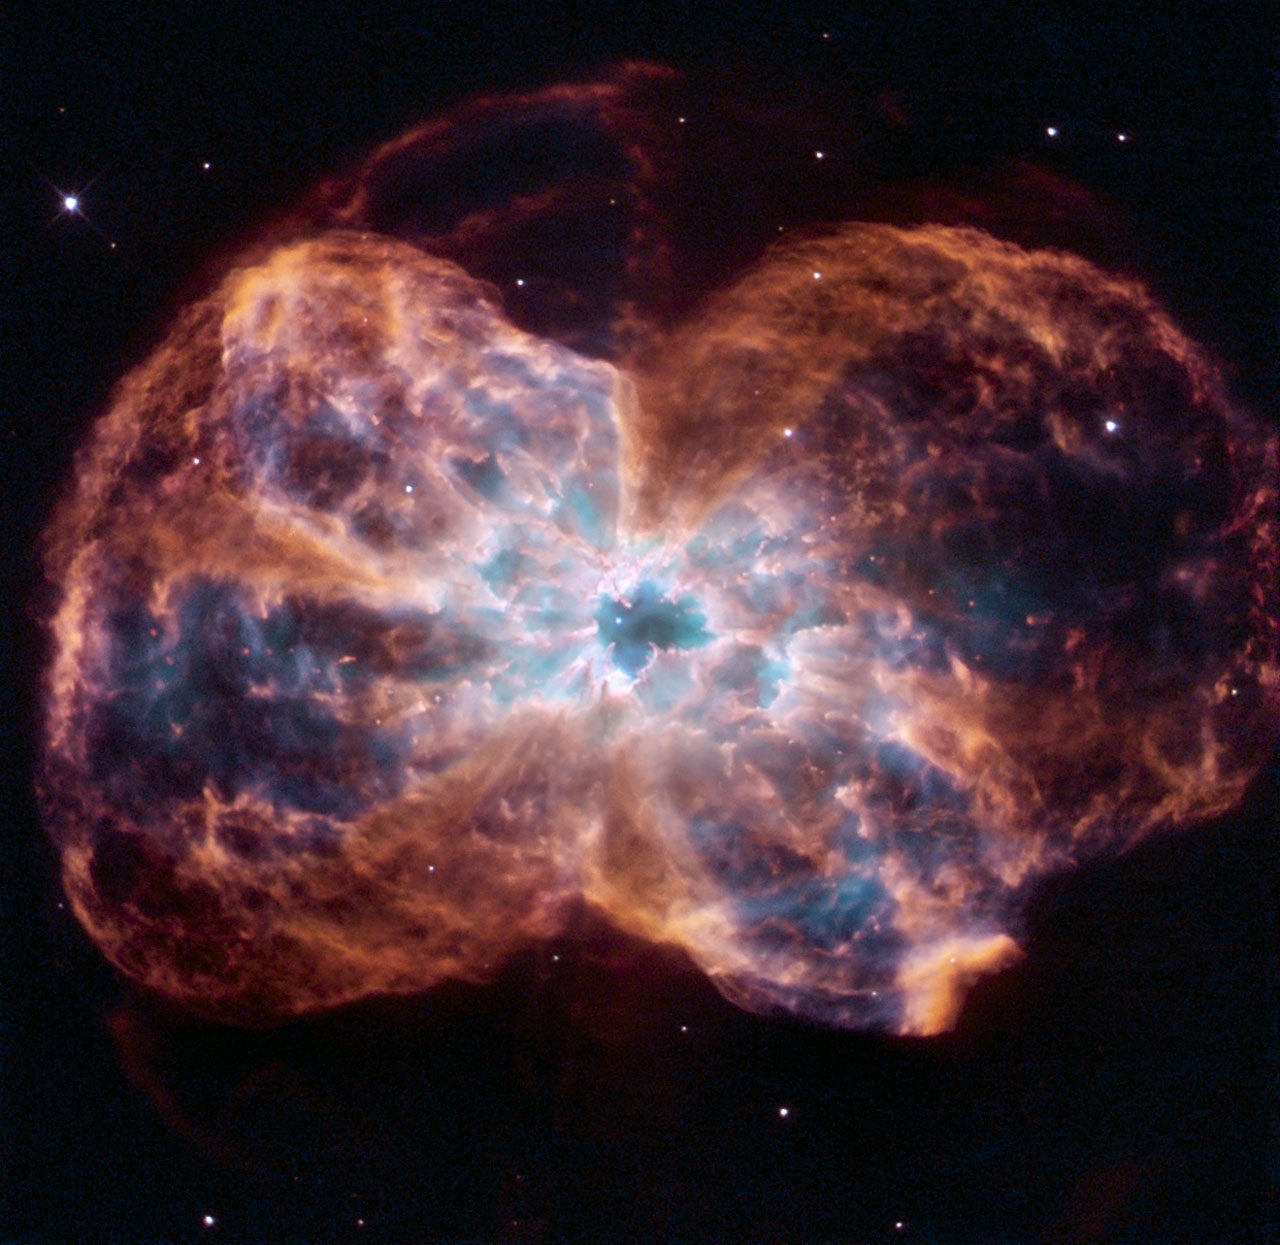 This image of NGC 2440 shows the colourful "last hurrah" of a star like our Sun. The star is ending its life by casting off its outer layers of gas, which formed a cocoon around the star's remaining core. Ultraviolet light from the dying star makes the material glow. The burned-out star, called a white dwarf, is the white dot in the centre.